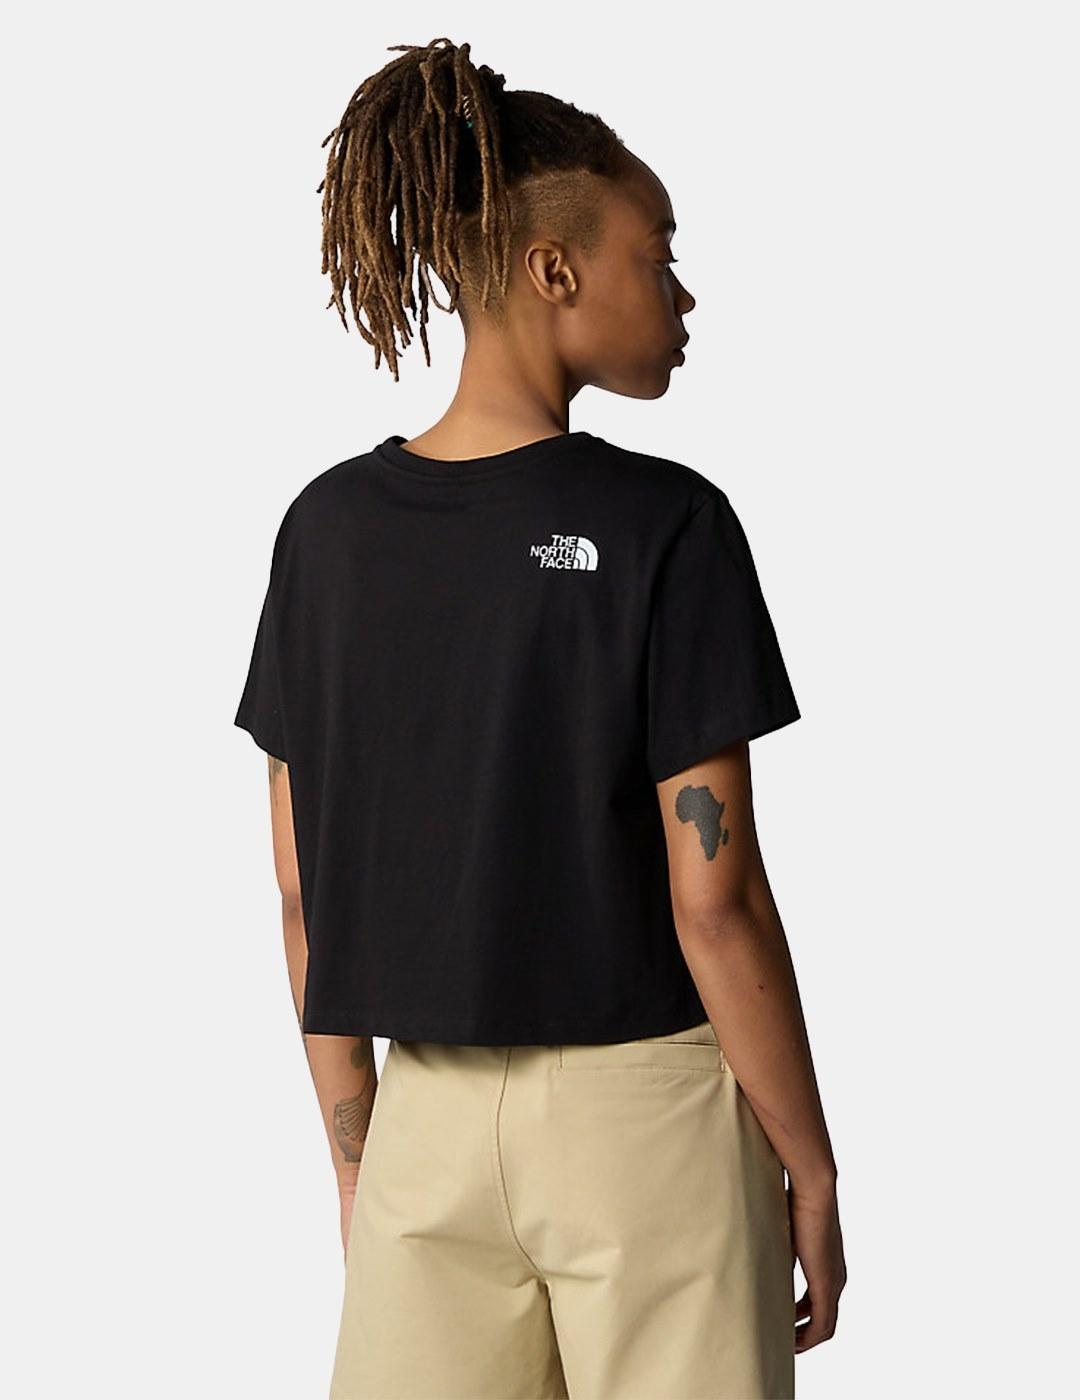 Camiseta The North Face Cropped Fine Negro